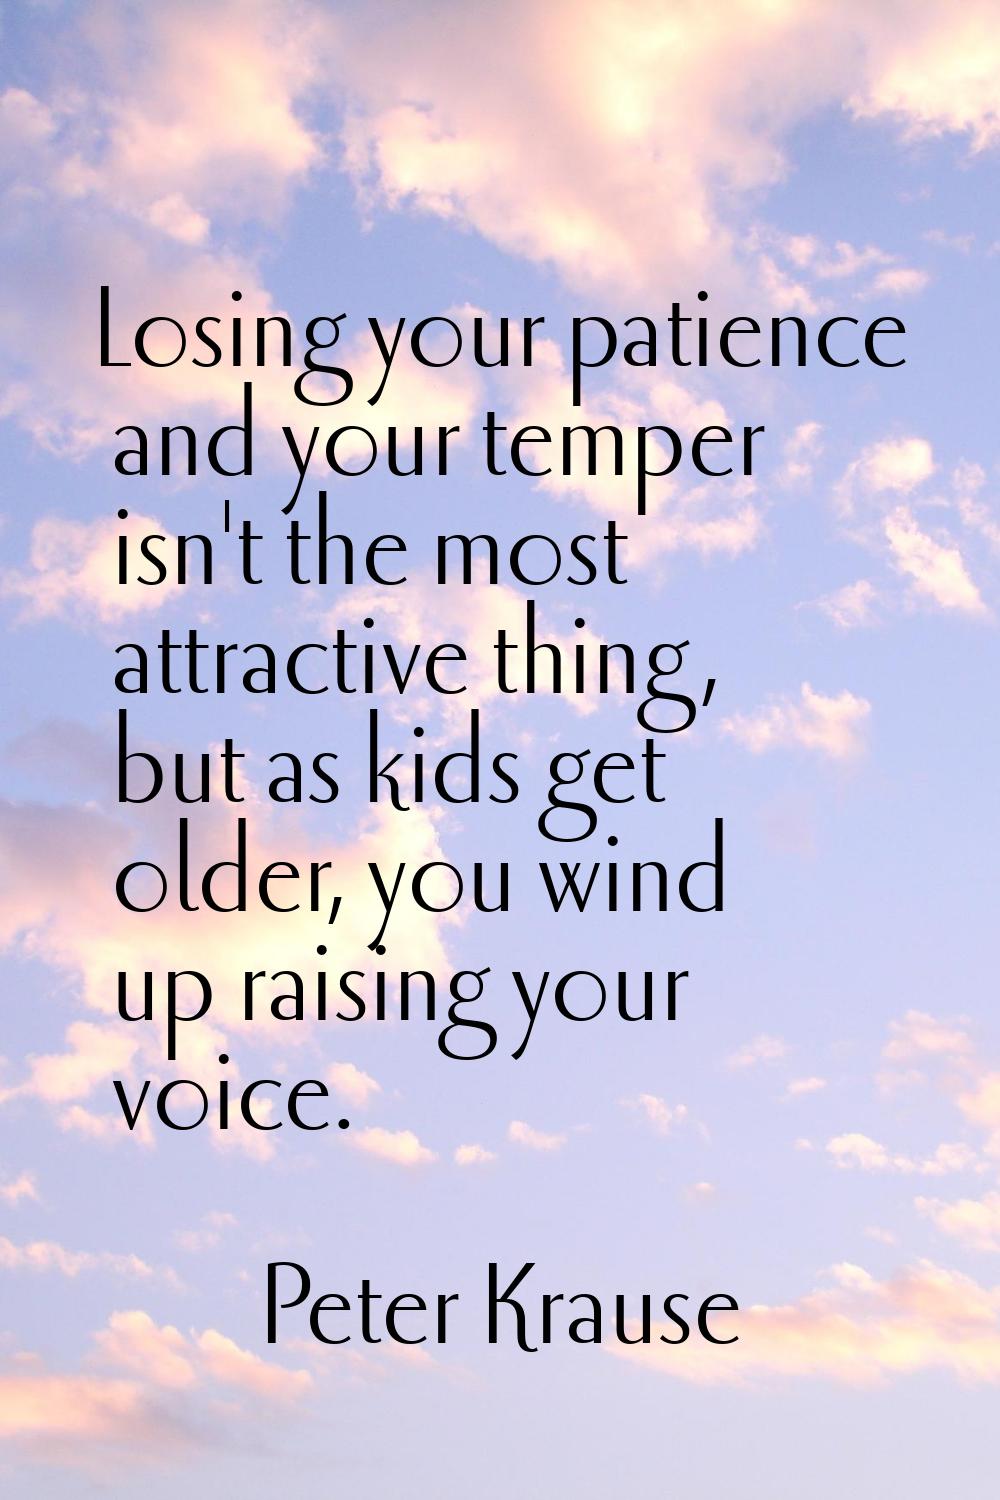 Losing your patience and your temper isn't the most attractive thing, but as kids get older, you wi